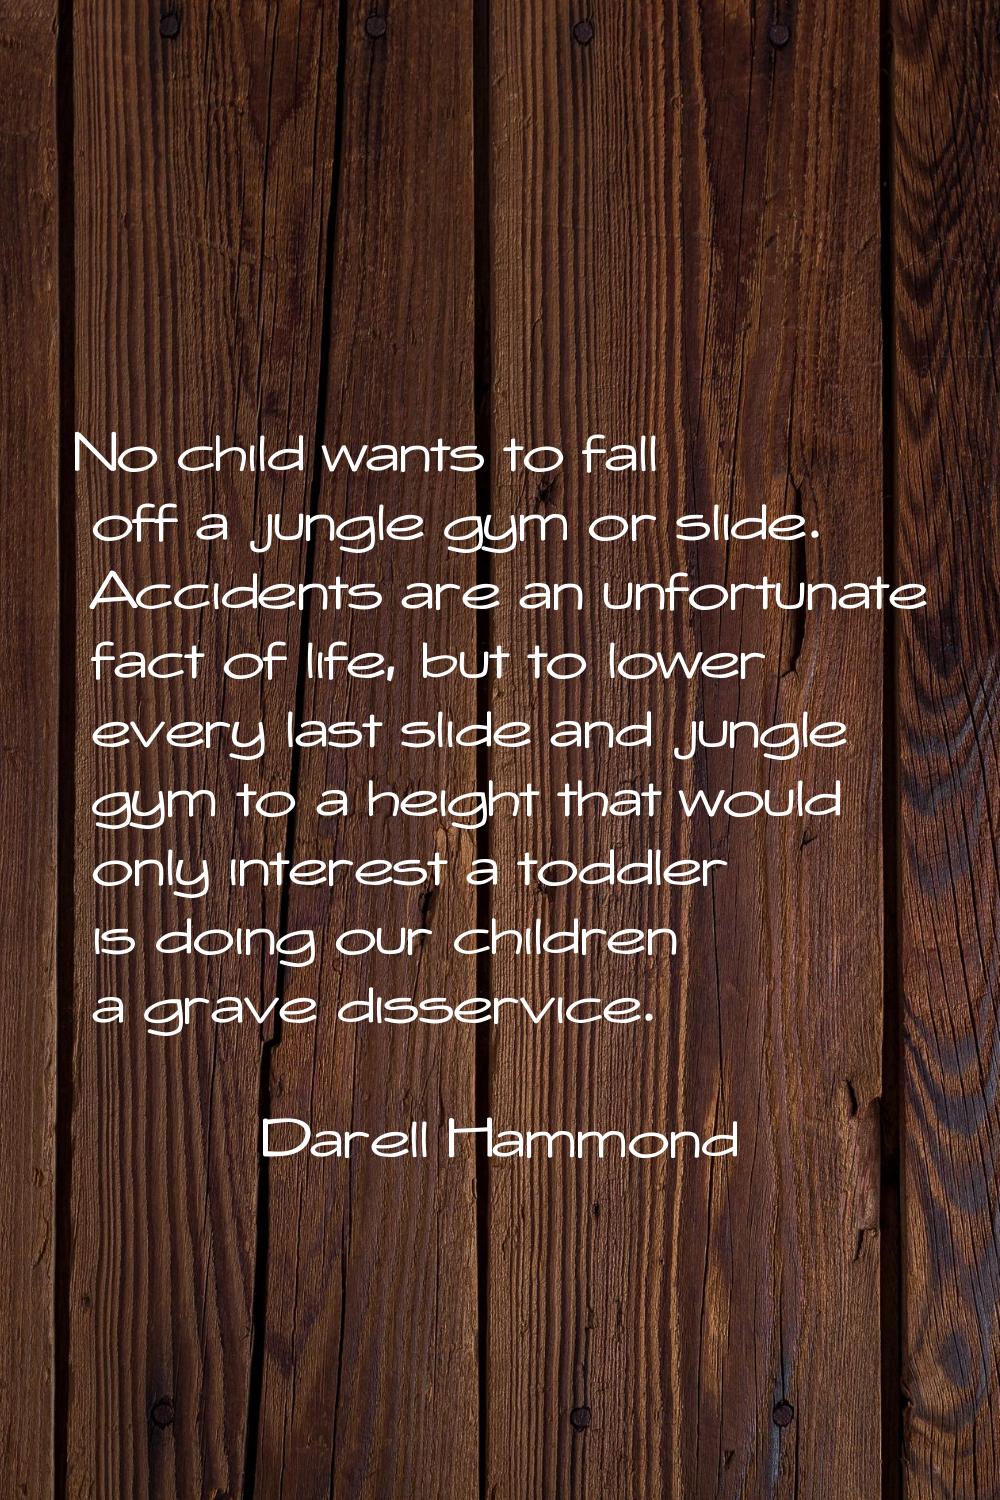 No child wants to fall off a jungle gym or slide. Accidents are an unfortunate fact of life, but to